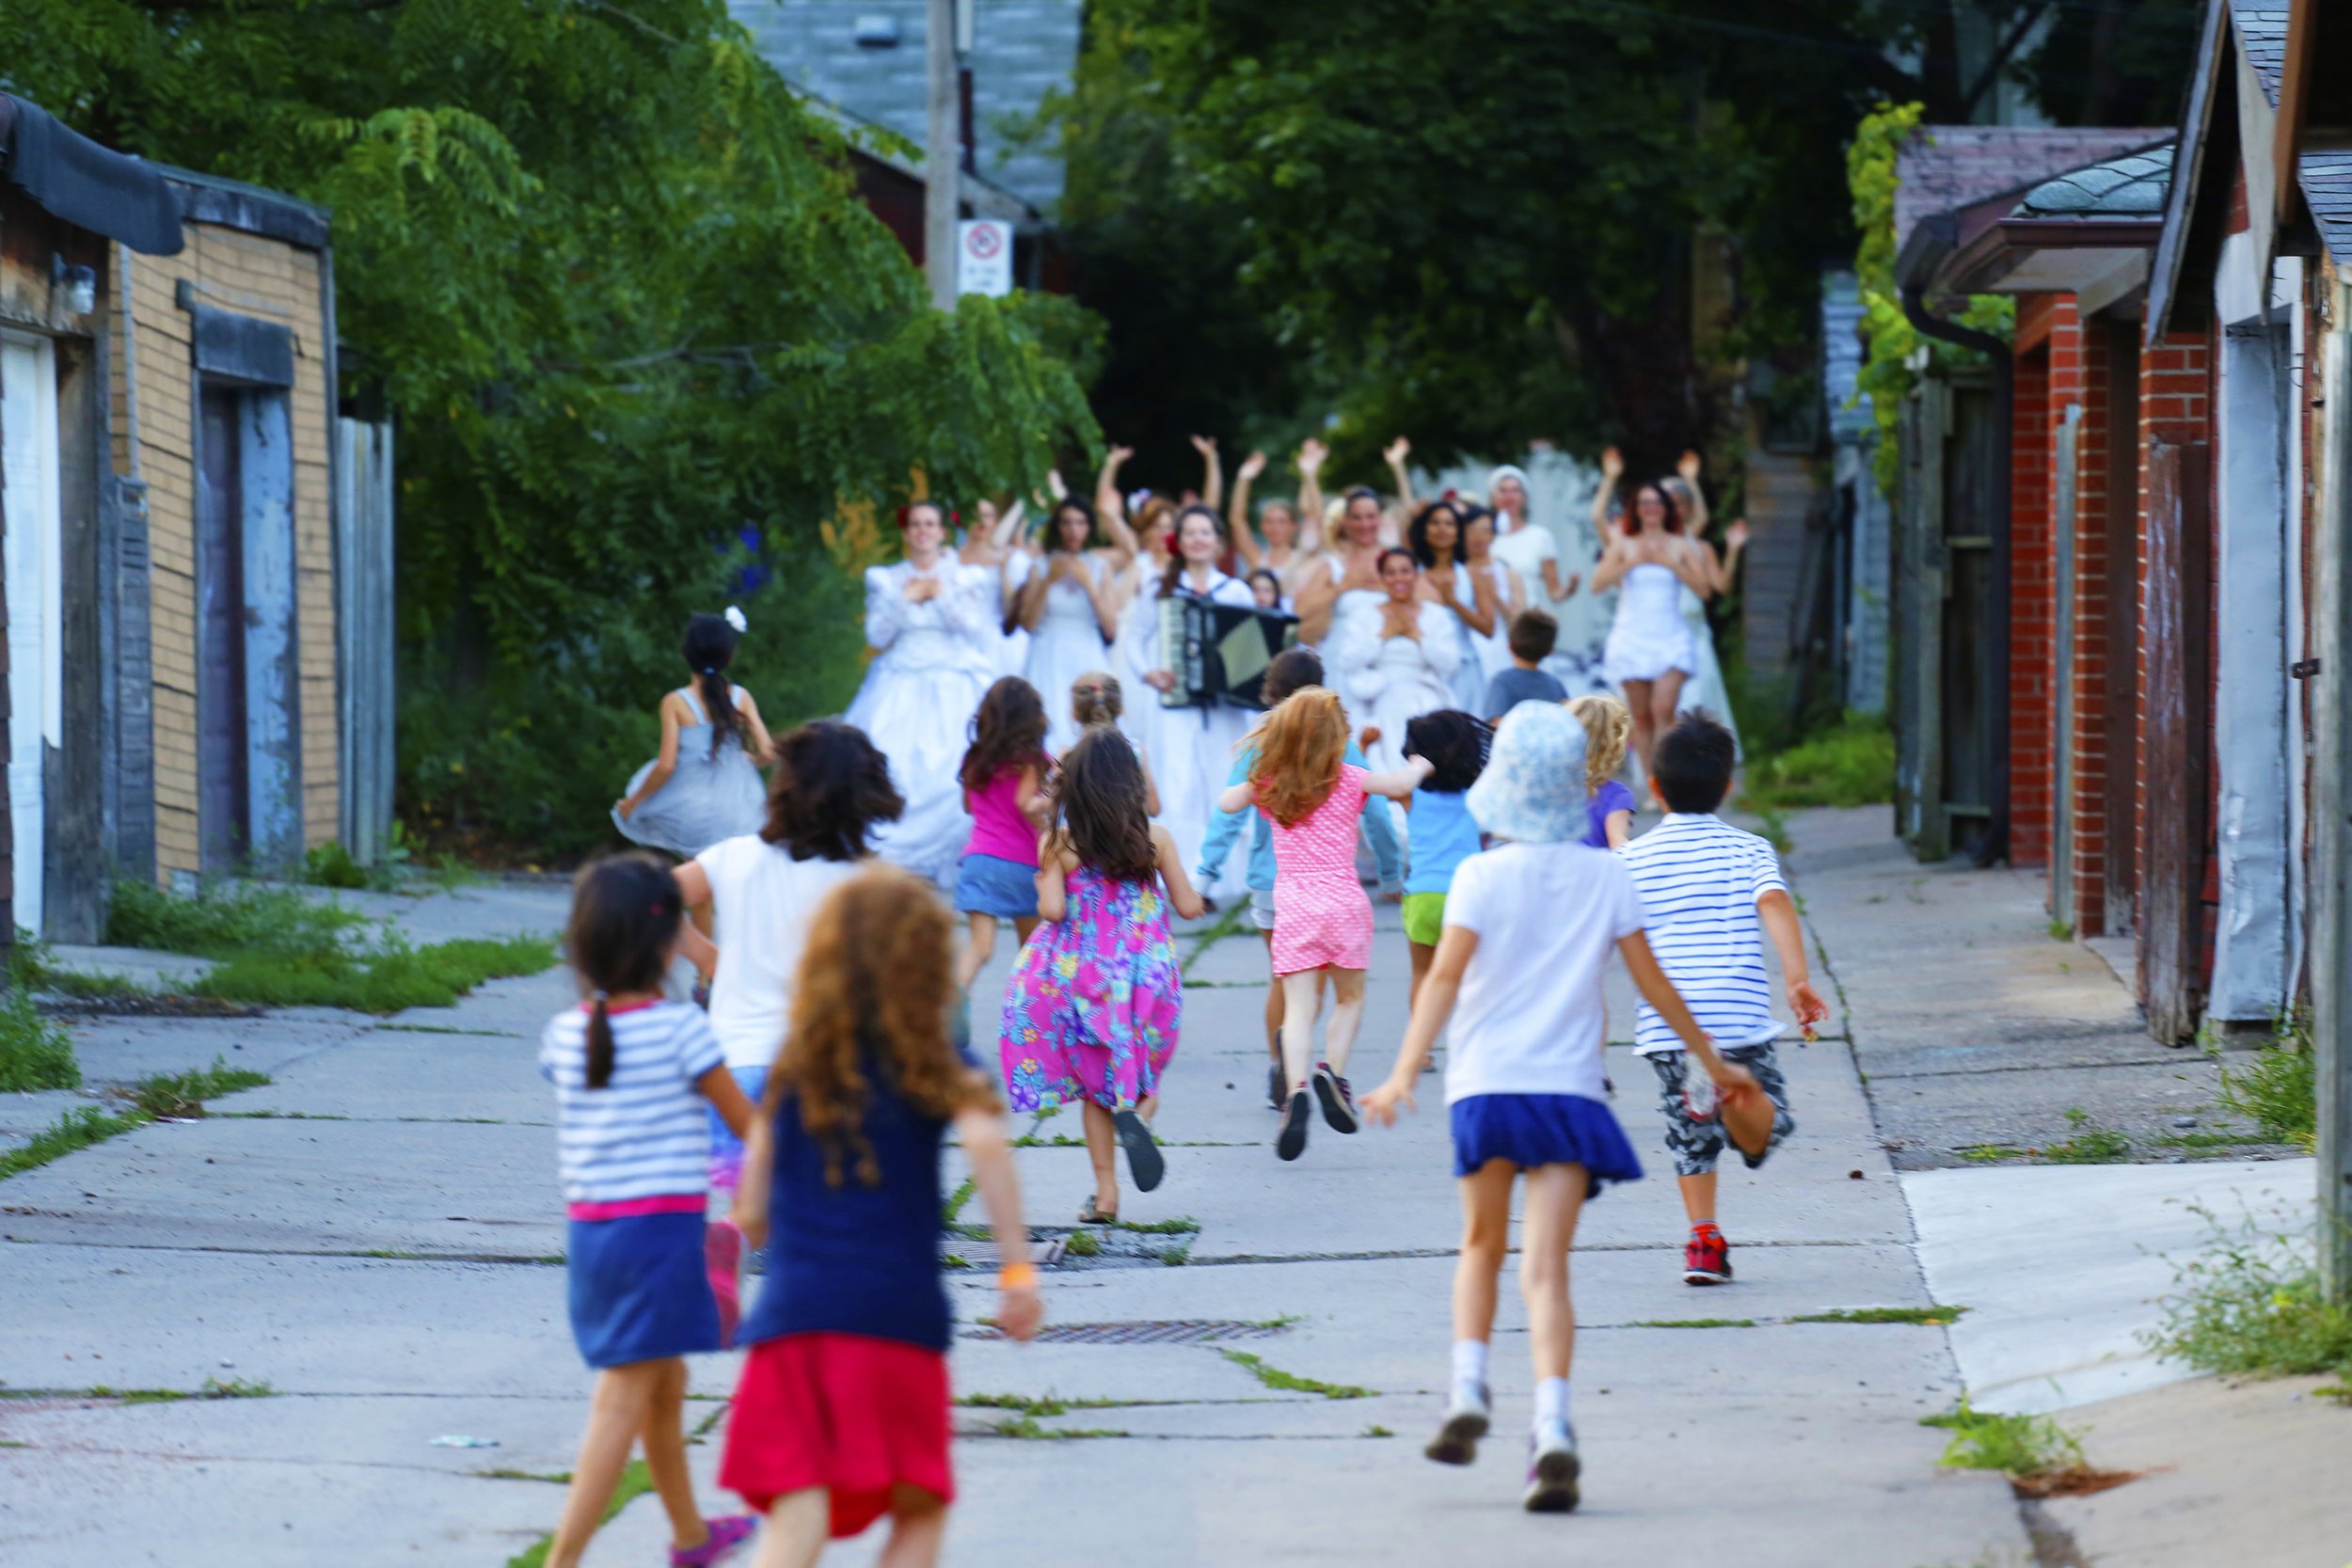 A large group of children running towards the wedding brigade